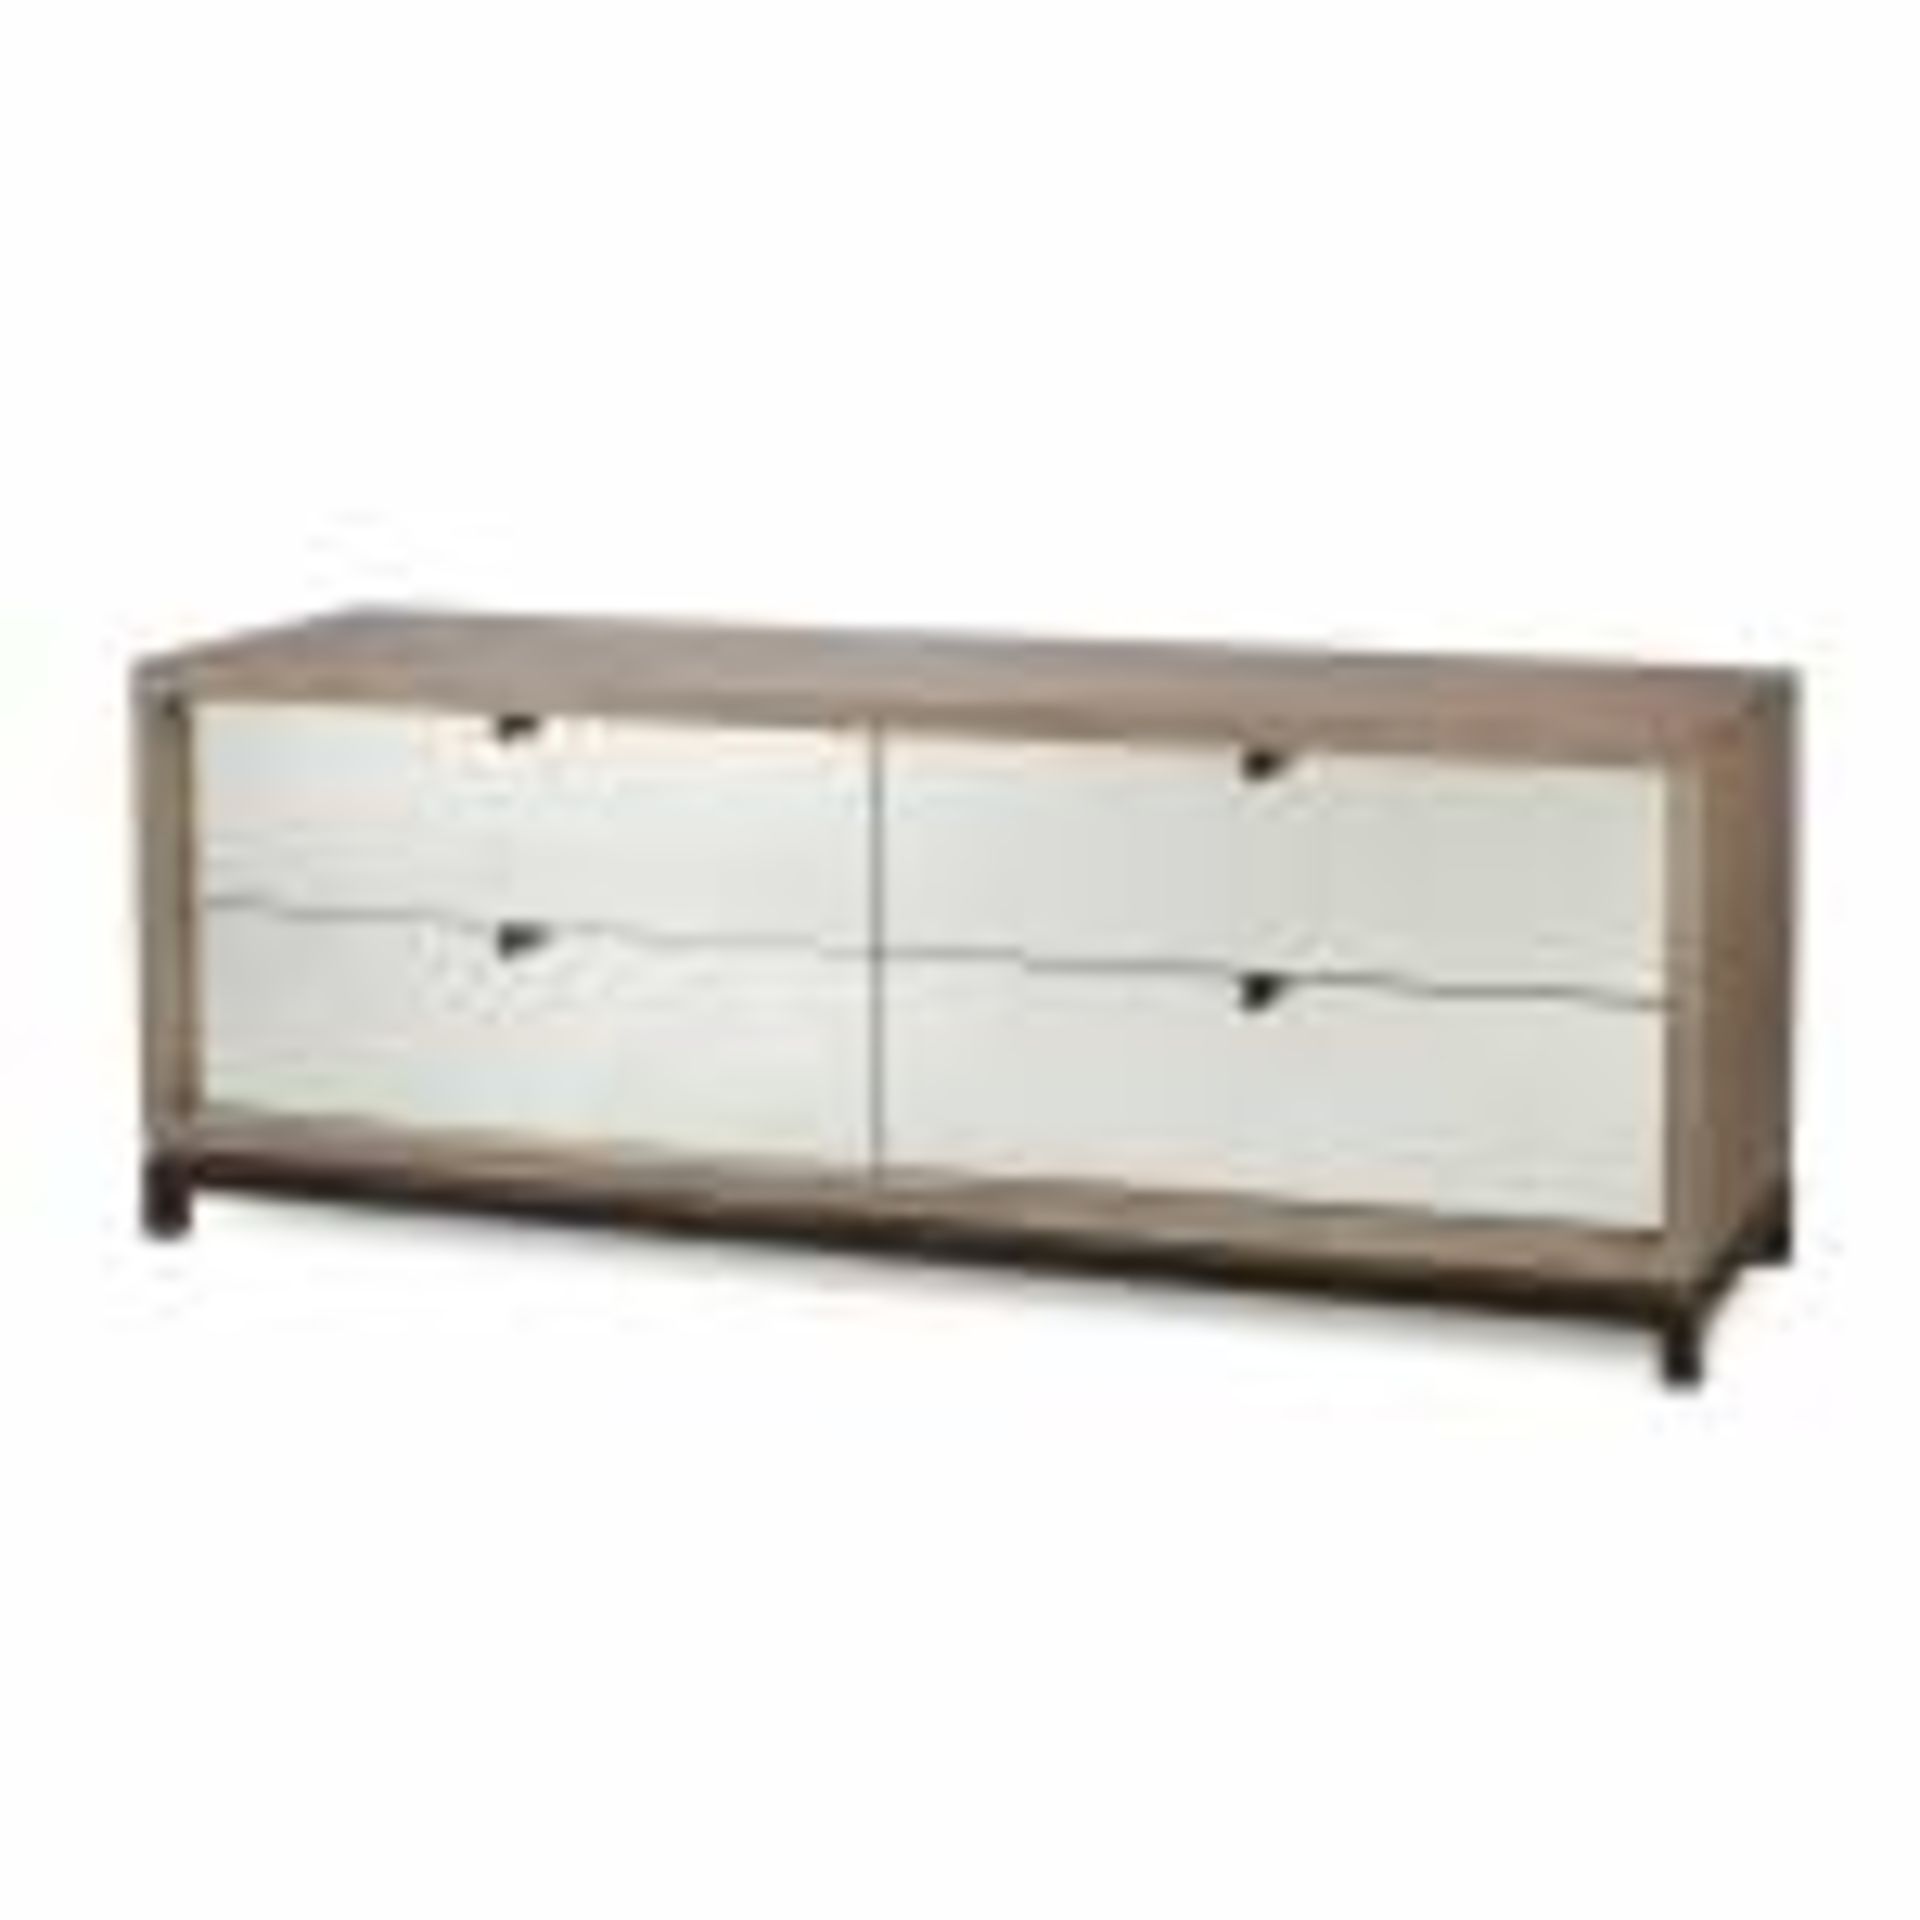 Miguel Dresser 4 Drawer For Renowned Designer Thomas Bina It Is The Bold And Unusual Blending Of